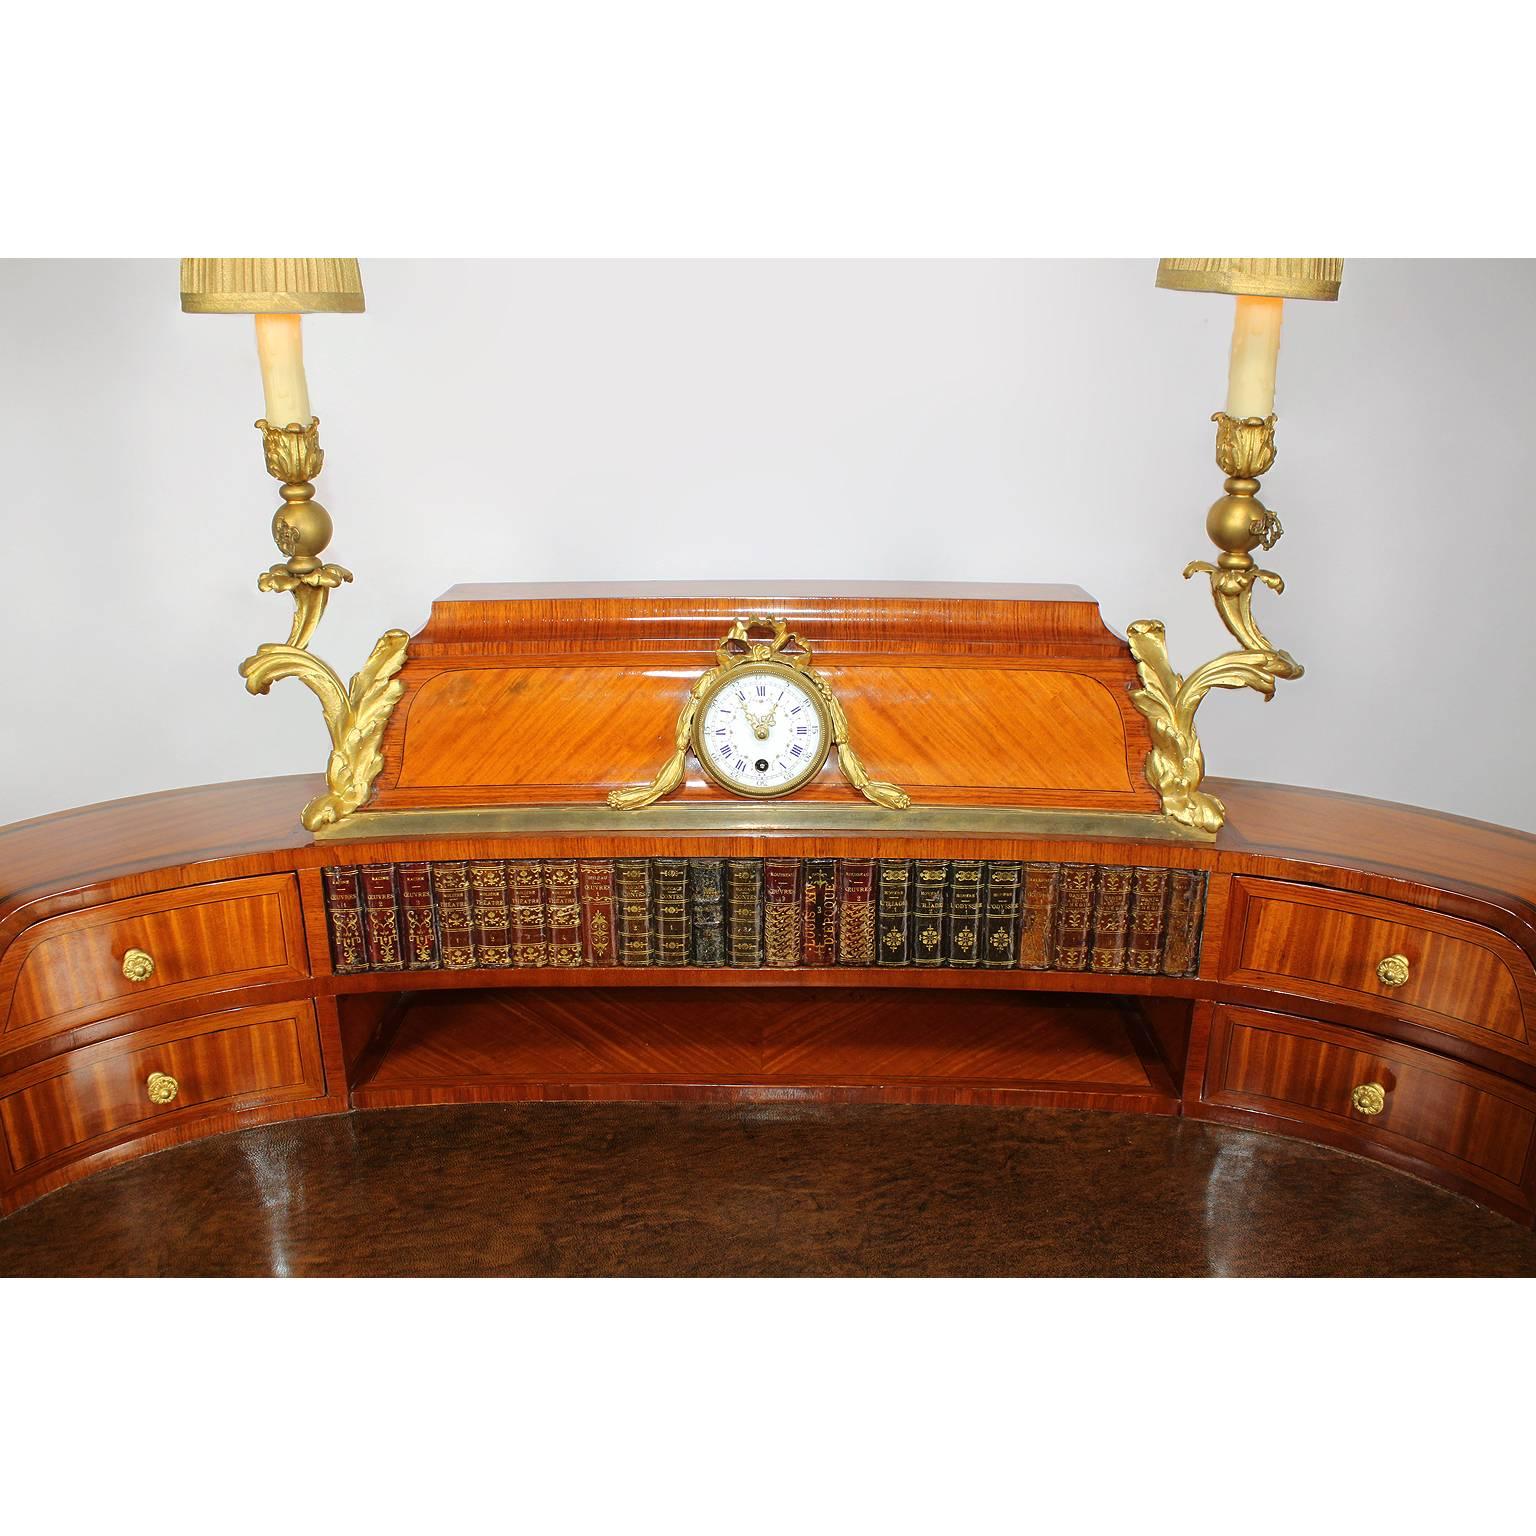 A very fine French 19th century tulipwood, mahogany and ormolu-mounted Bureau de Dame Lady's secretary desk, attributed to Maison Millet. The superstructure centered by a clock with a porcelain face decorated with flower strands and Roman numerals